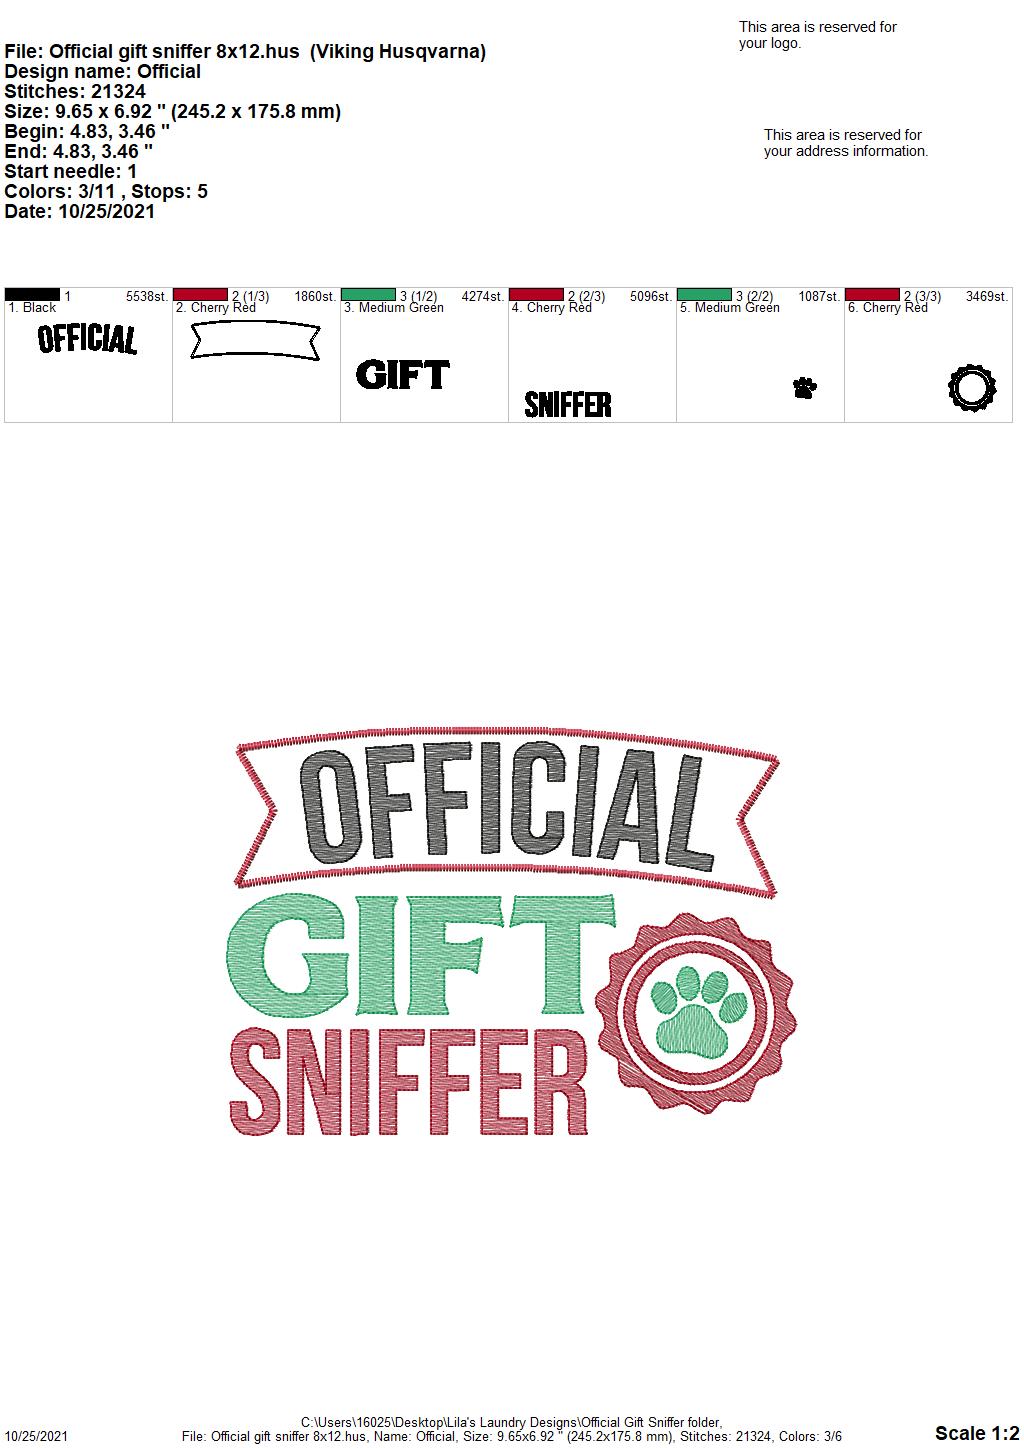 Official Gift Sniffer - 4 sizes- Digital Embroidery Design